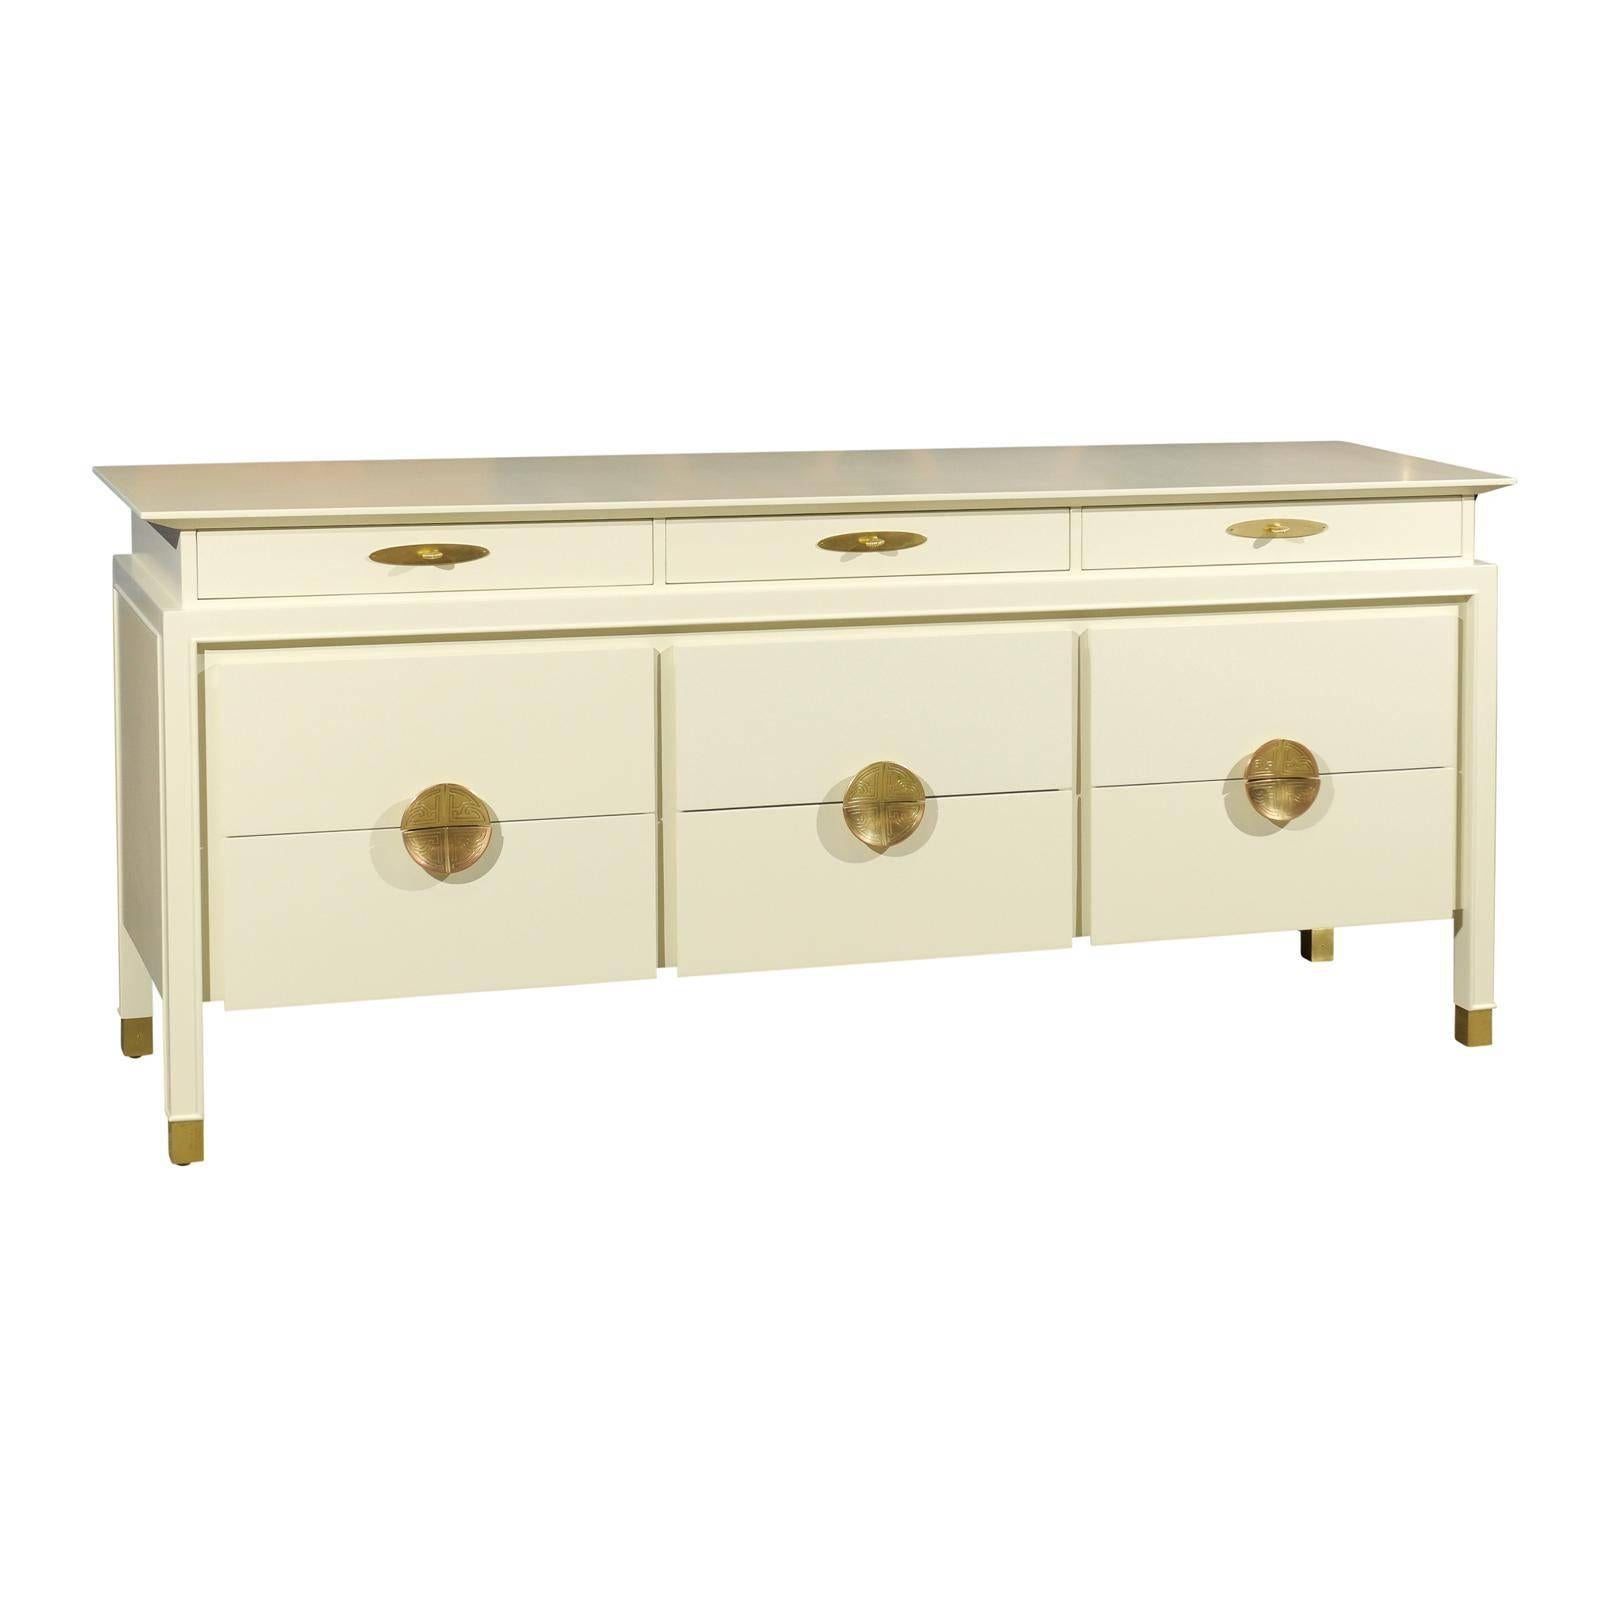 Restored Nine-Drawer Chest by Johnson Furniture Company in Cream Lacquer